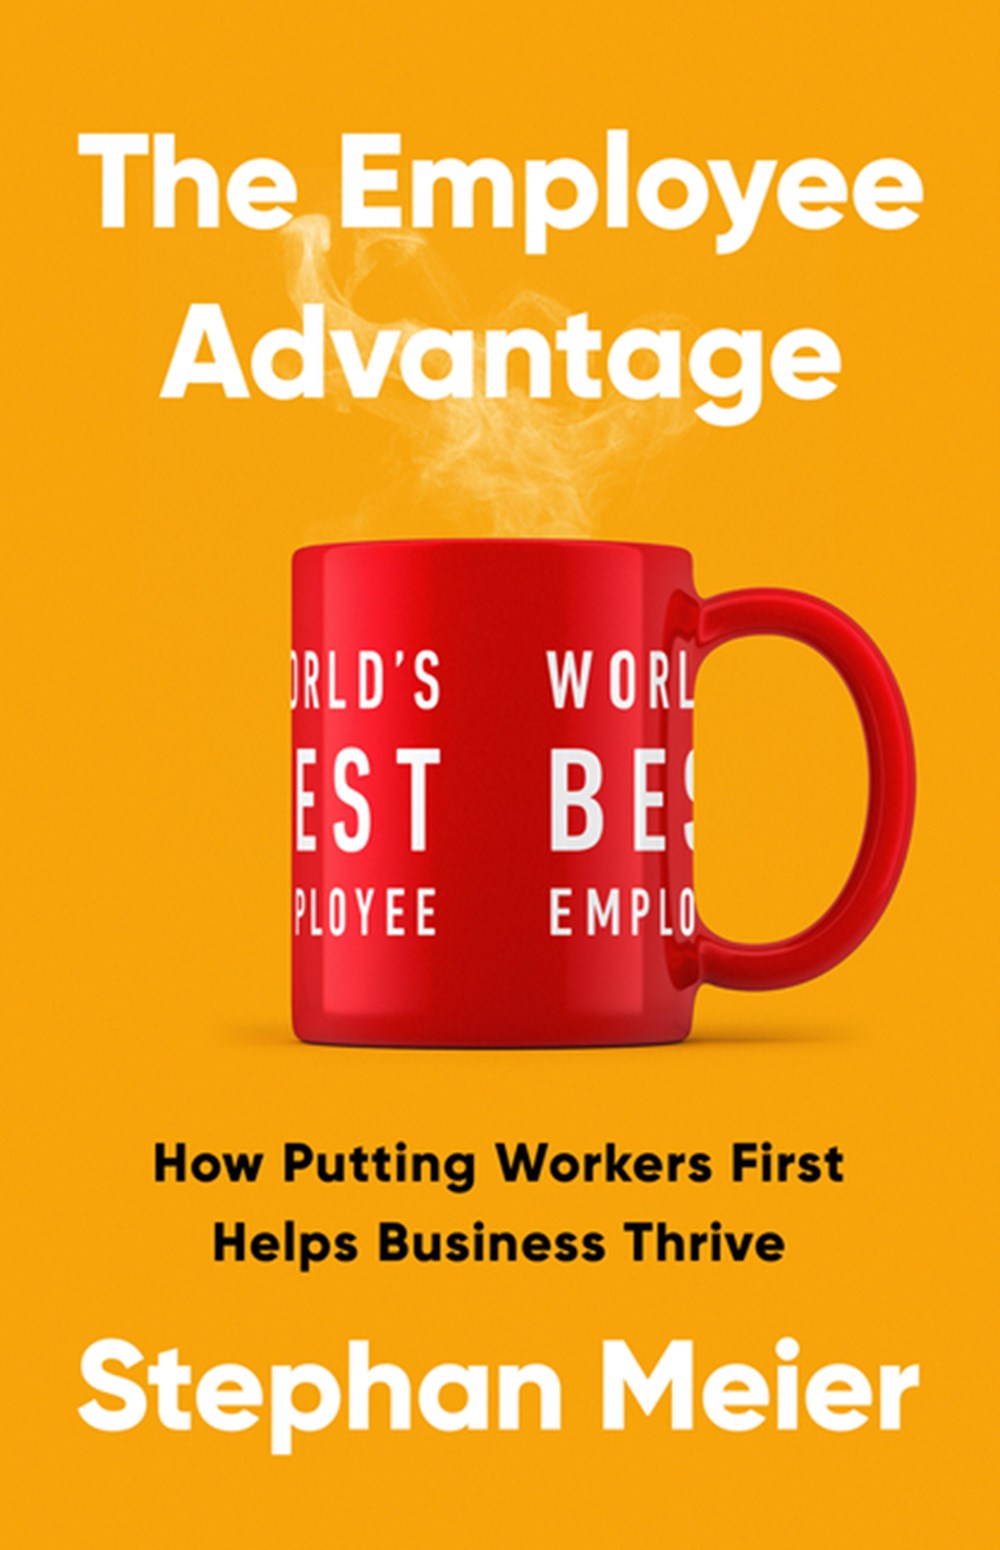 Employee Advantage: How Putting Workers First Helps Business Thrive